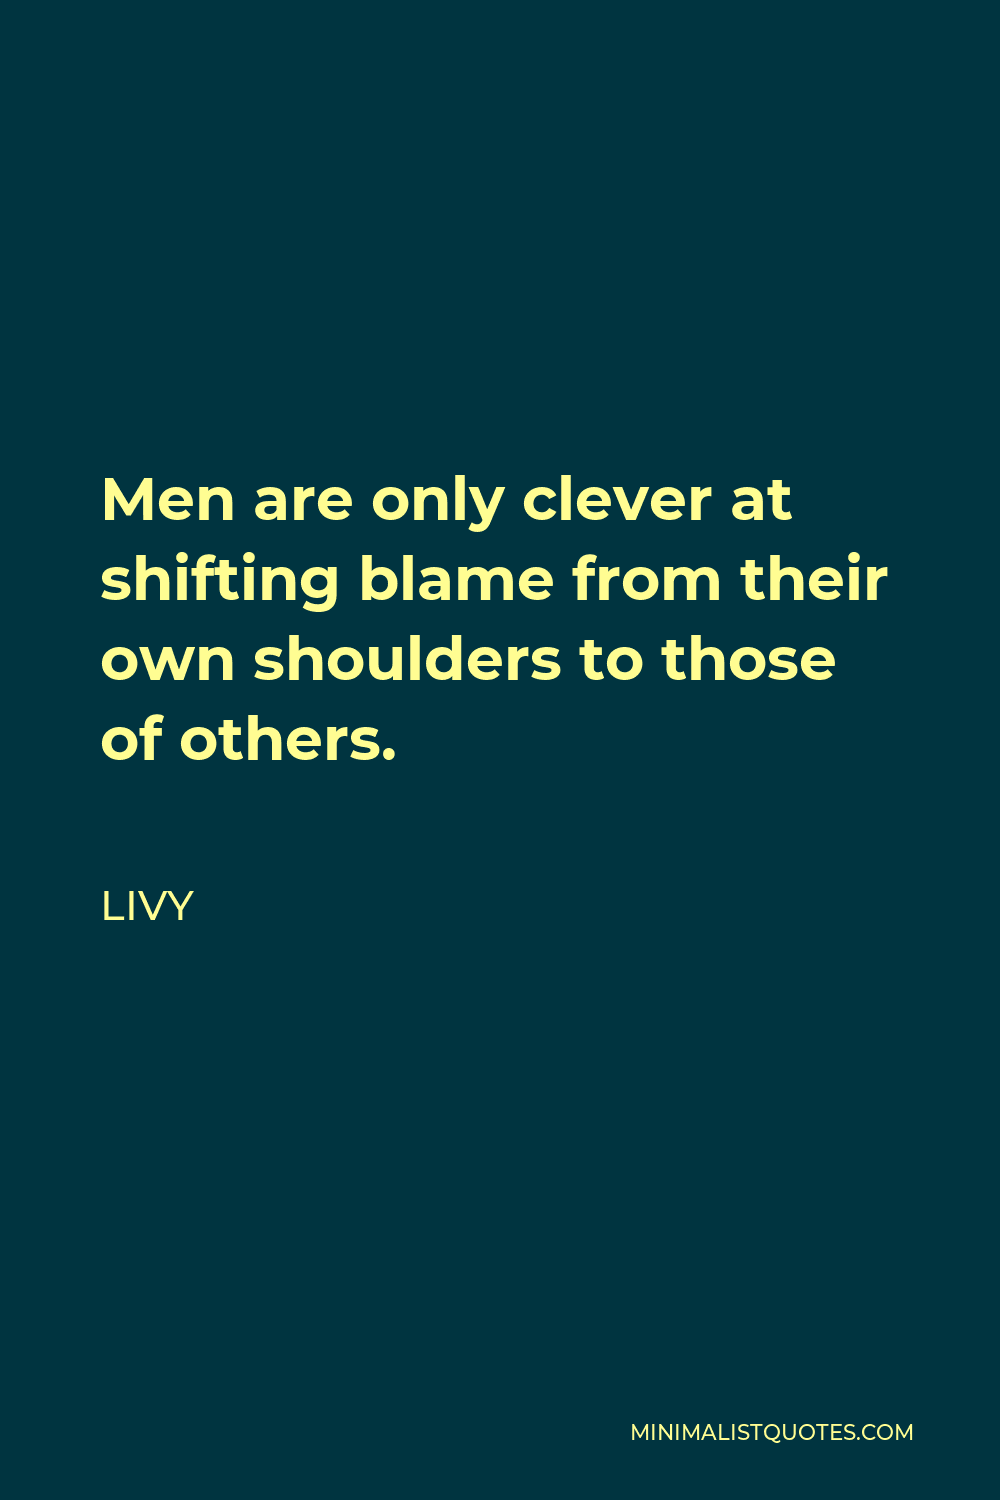 Livy Quote - Men are only clever at shifting blame from their own shoulders to those of others.